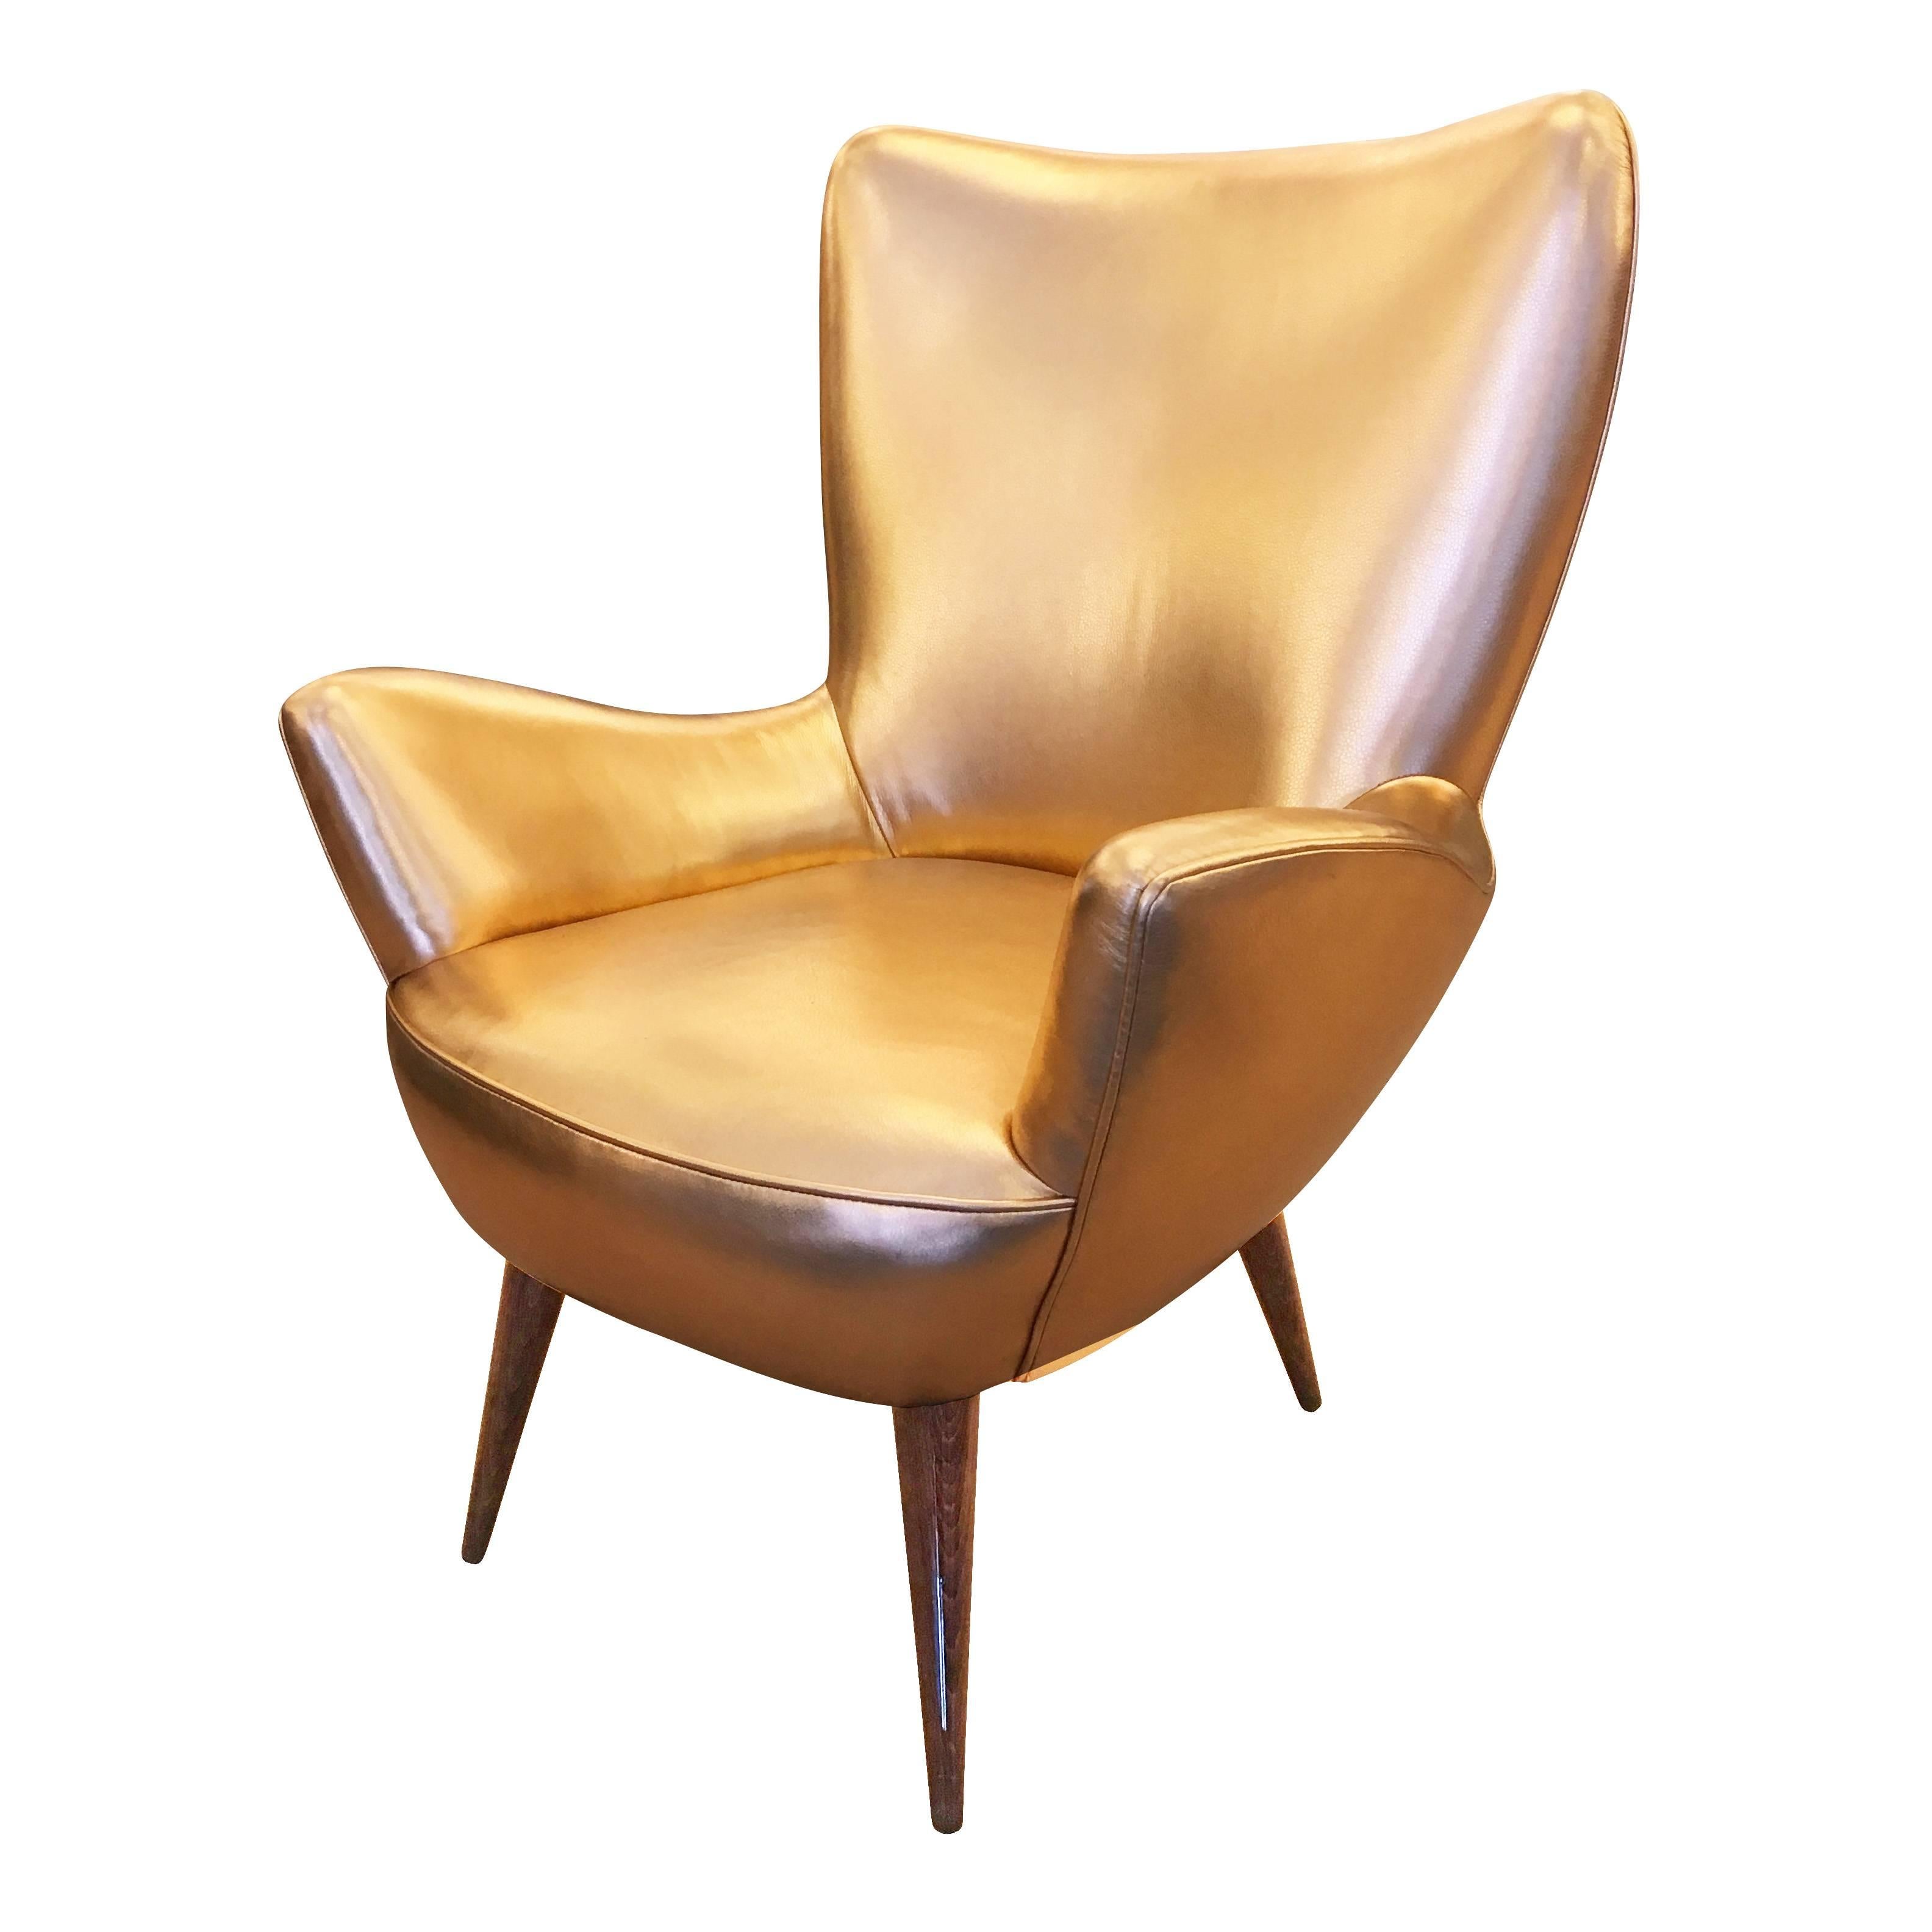 Charming Italian Mid-Century lounge chair with soft and well designed silhouettes. The legs are wood. Was upholstered in a metallic gold leather for the 2018 Kips Bay Show House in NYC.

Width: 27.5